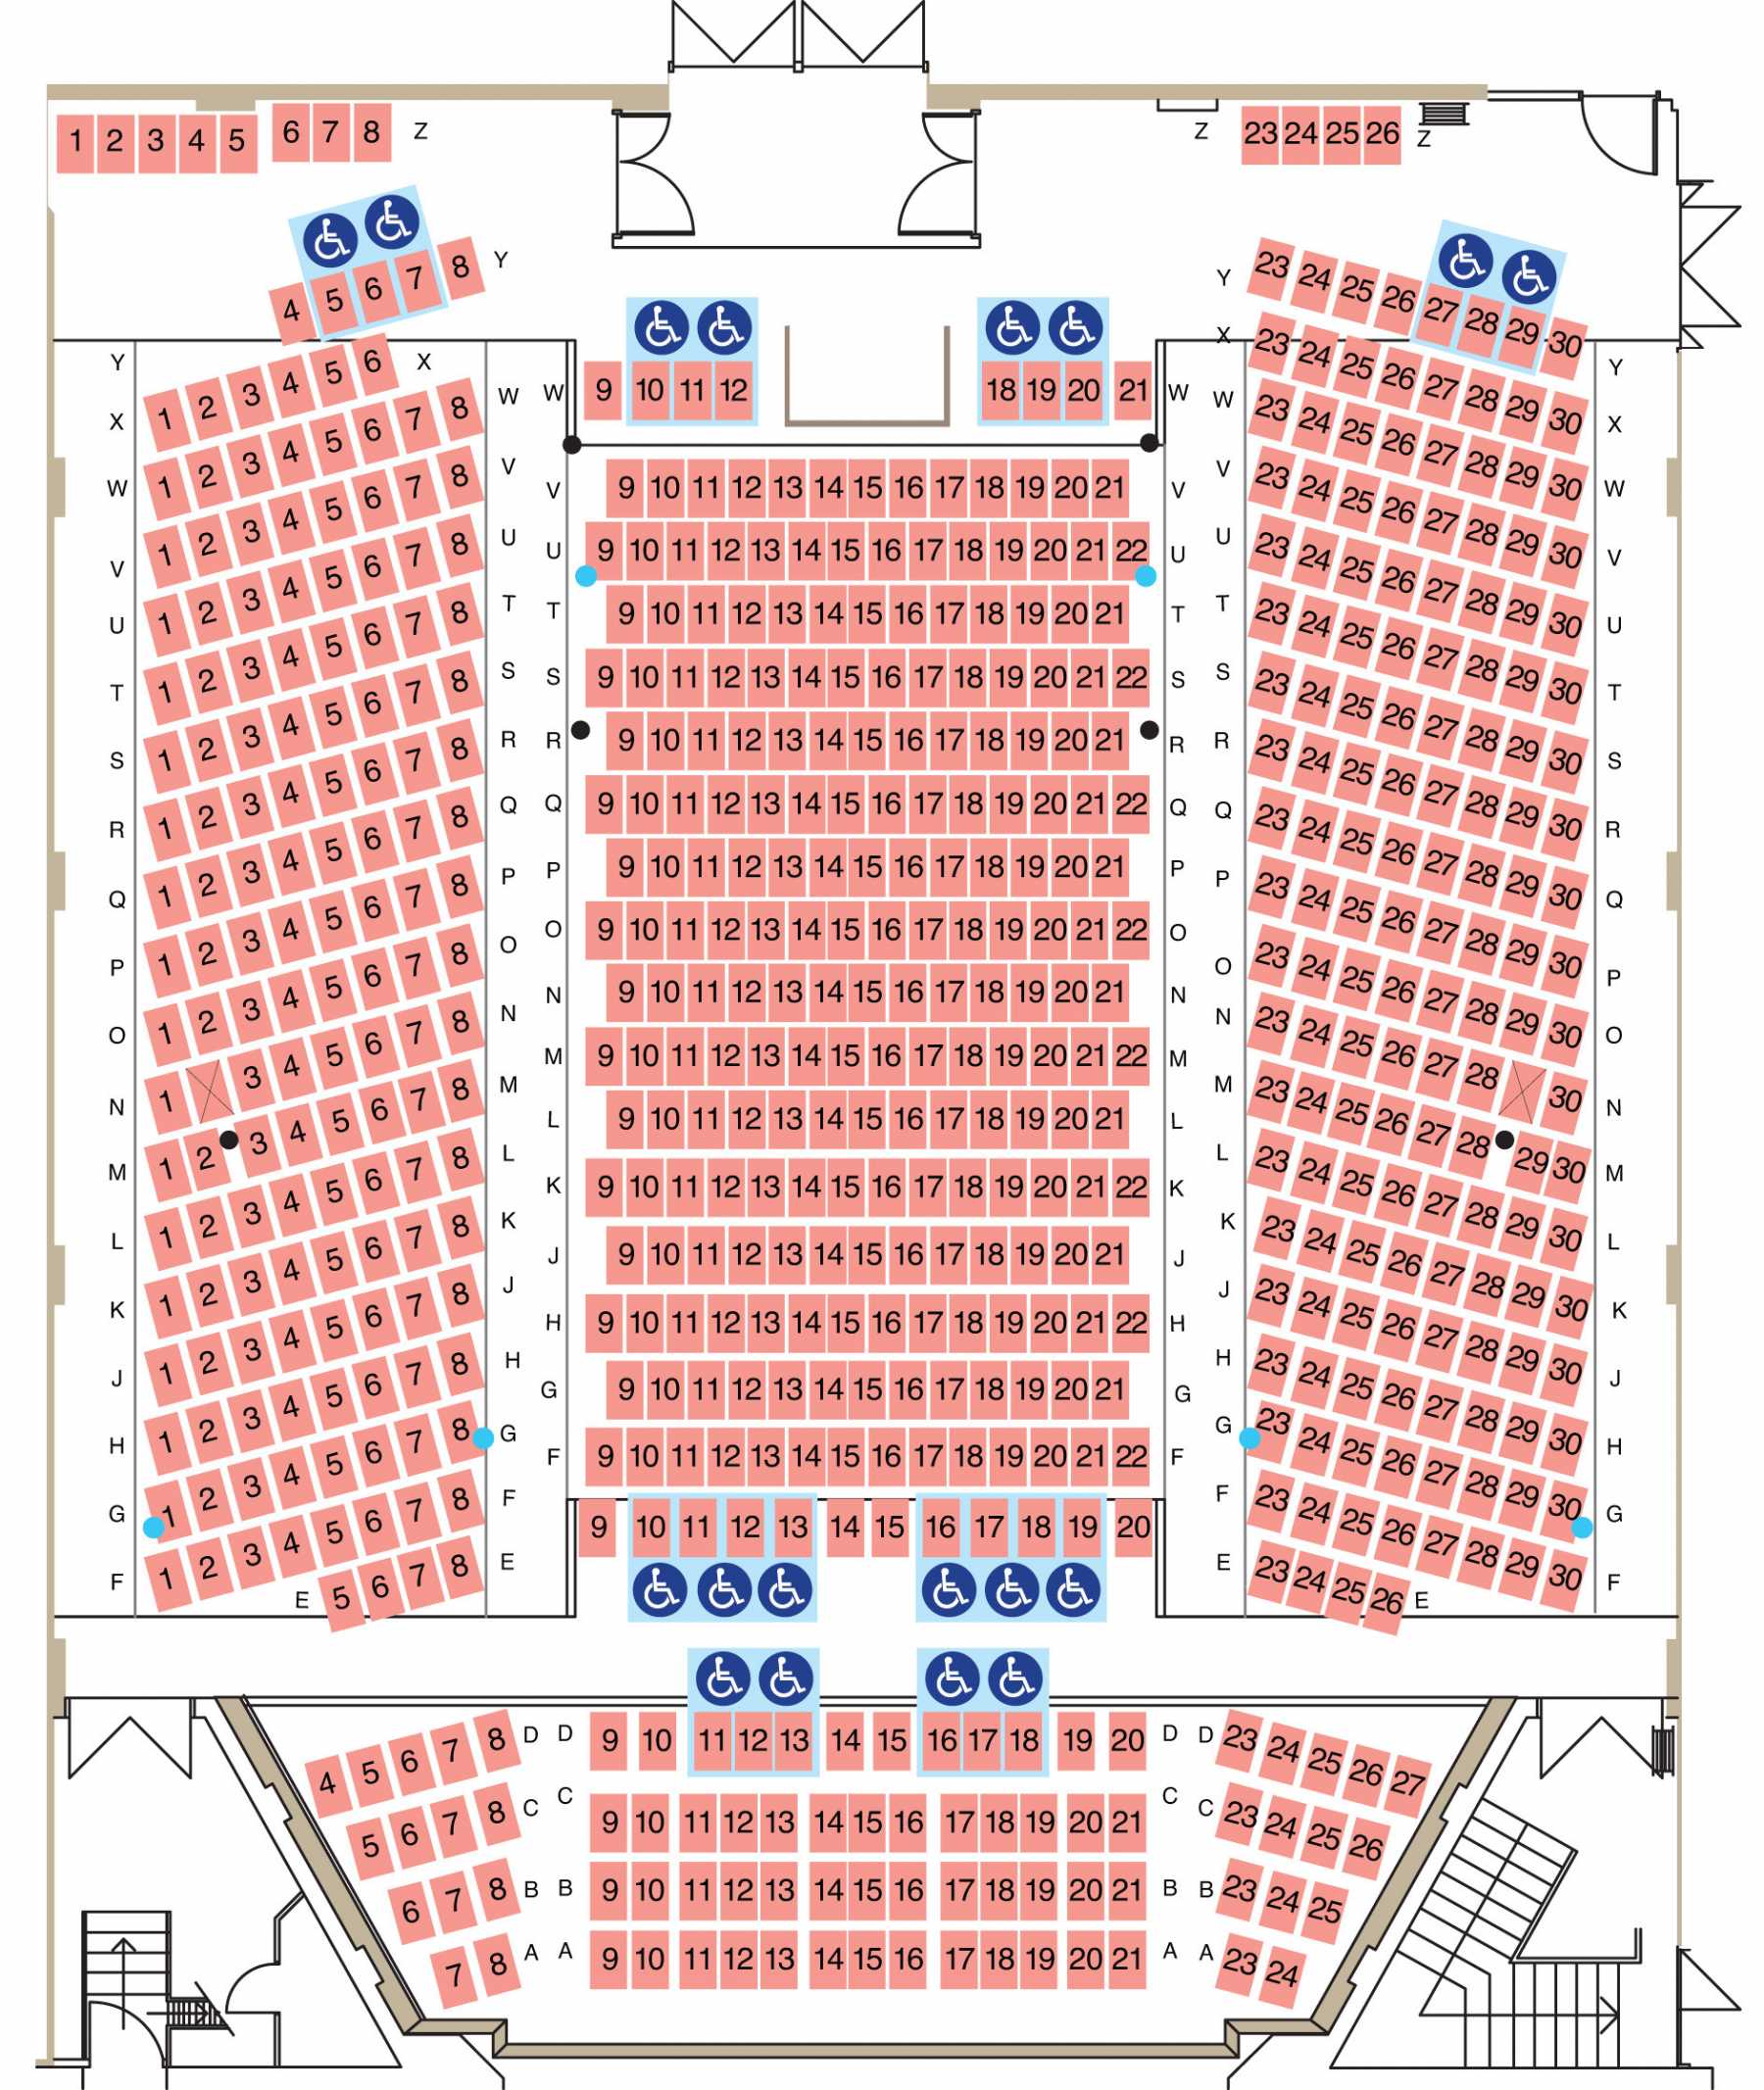 Prince Theater Seating Chart